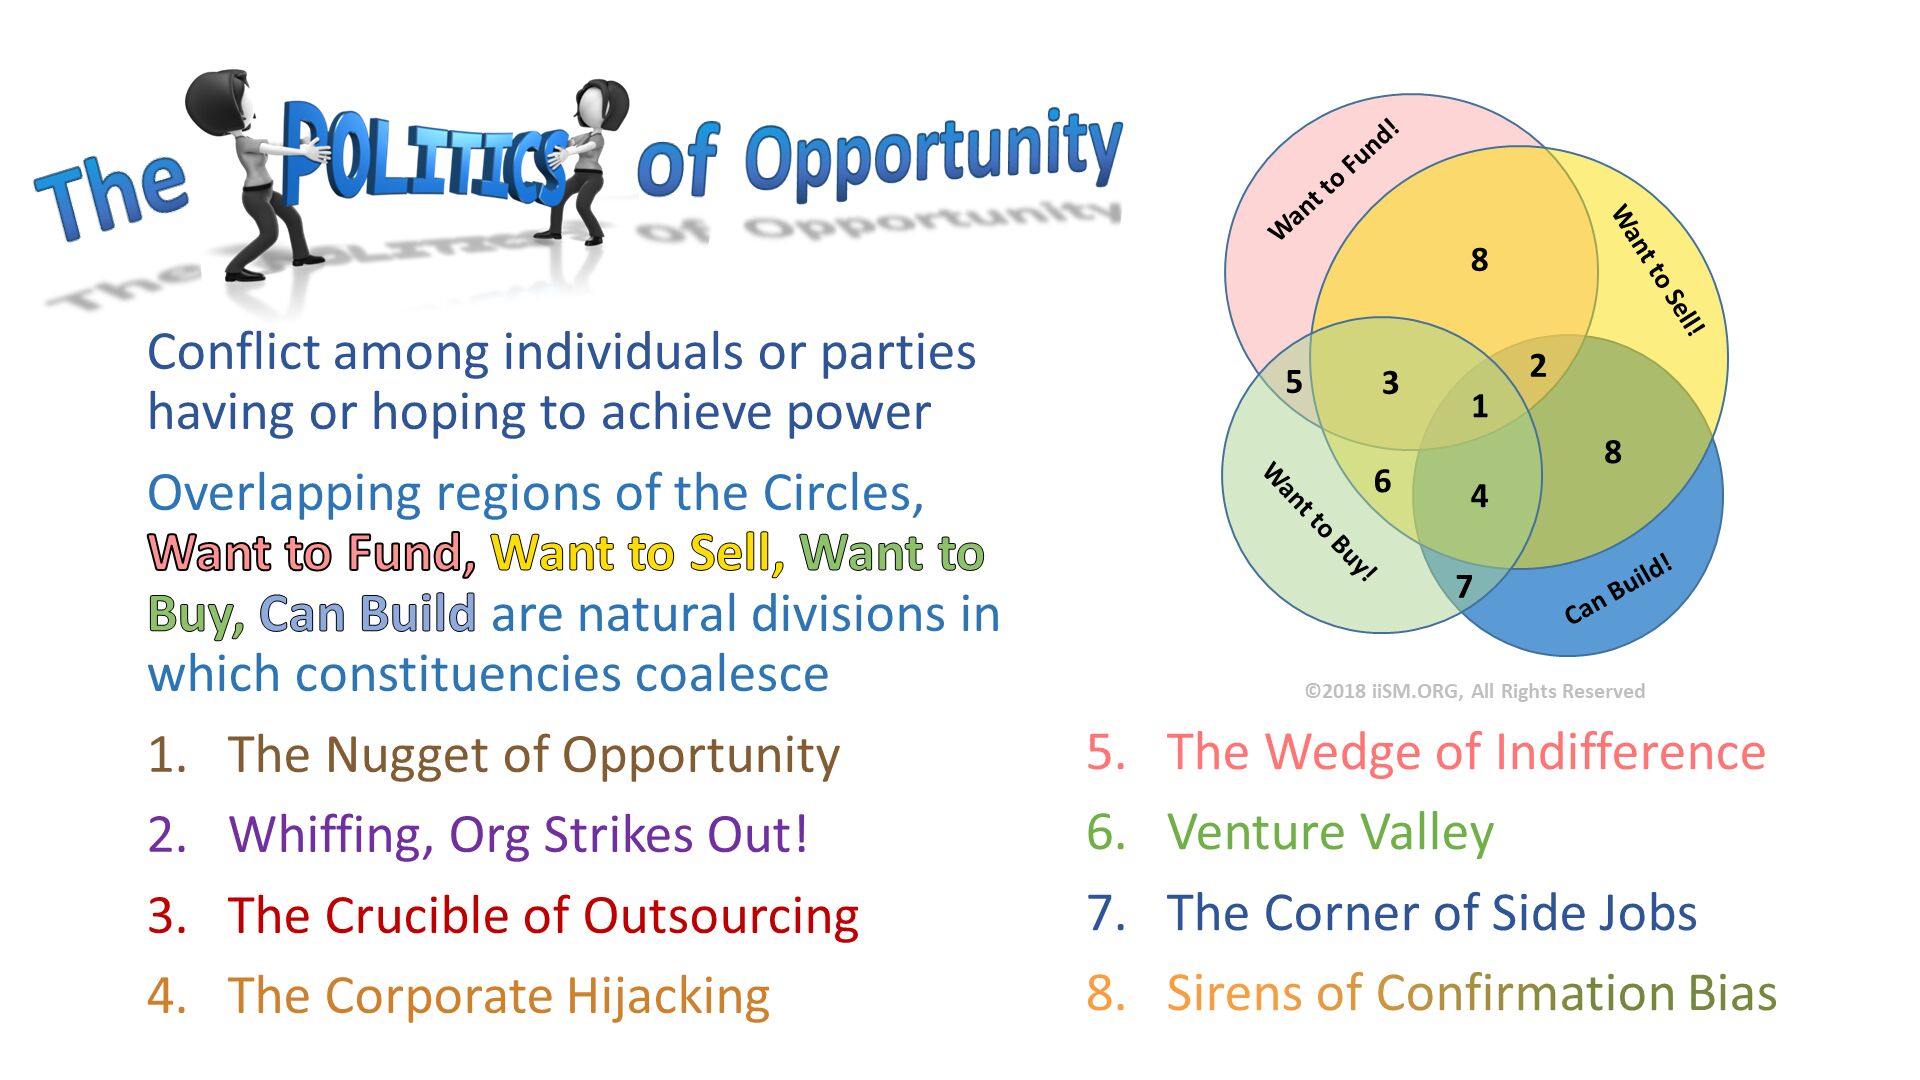 Conflict among individuals or parties having or hoping to achieve power
Overlapping regions of the Circles, Want to Fund, Want to Sell, Want to Buy, Can Build are natural divisions in which constituencies coalesce
The Nugget of Opportunity
Whiffing, Org Strikes Out!
The Crucible of Outsourcing
The Corporate Hijacking
. The Wedge of Indifference
Venture Valley
The Corner of Side Jobs
Sirens of Confirmation Bias
. 